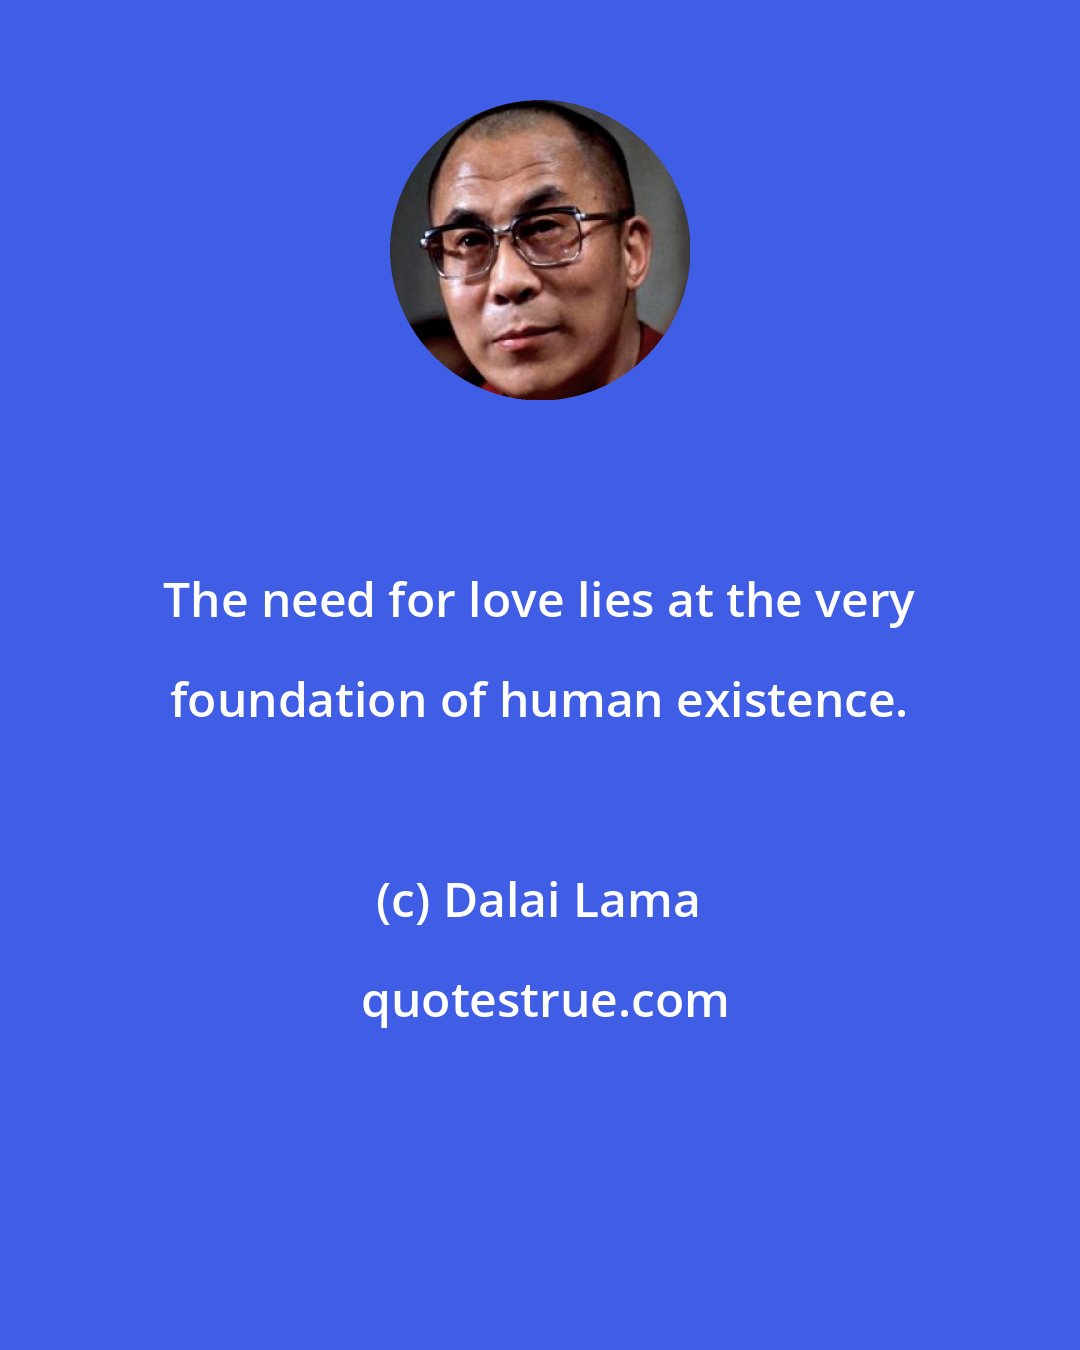 Dalai Lama: The need for love lies at the very foundation of human existence.